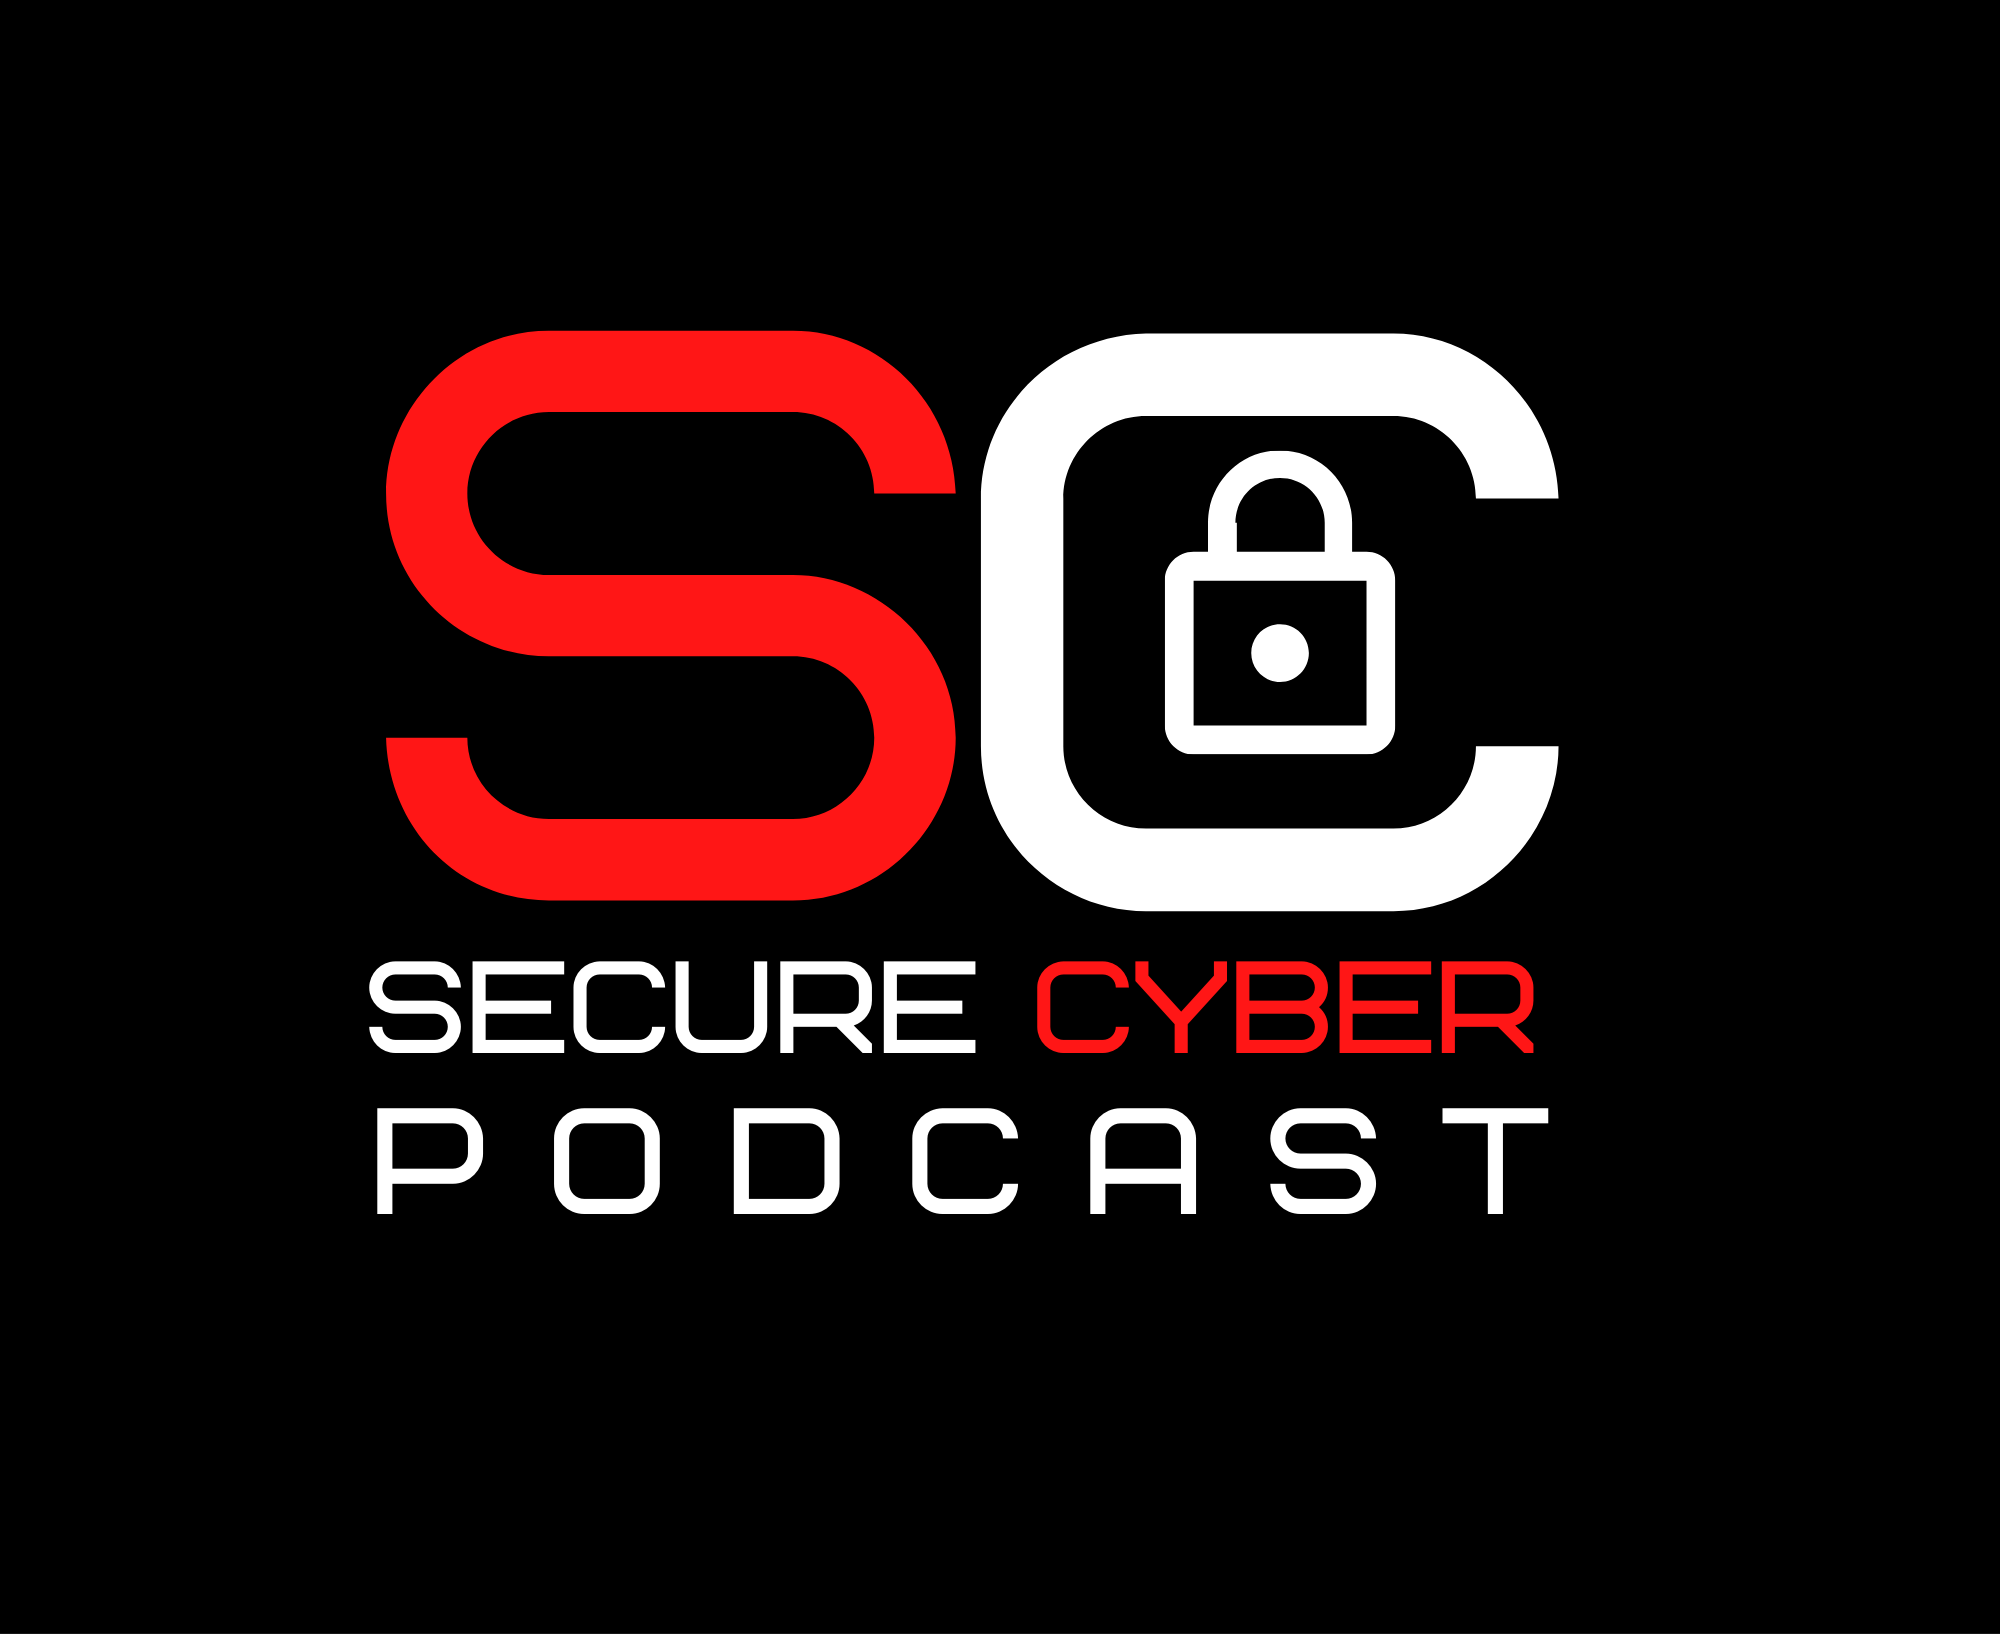 The SecureCyber Podcast